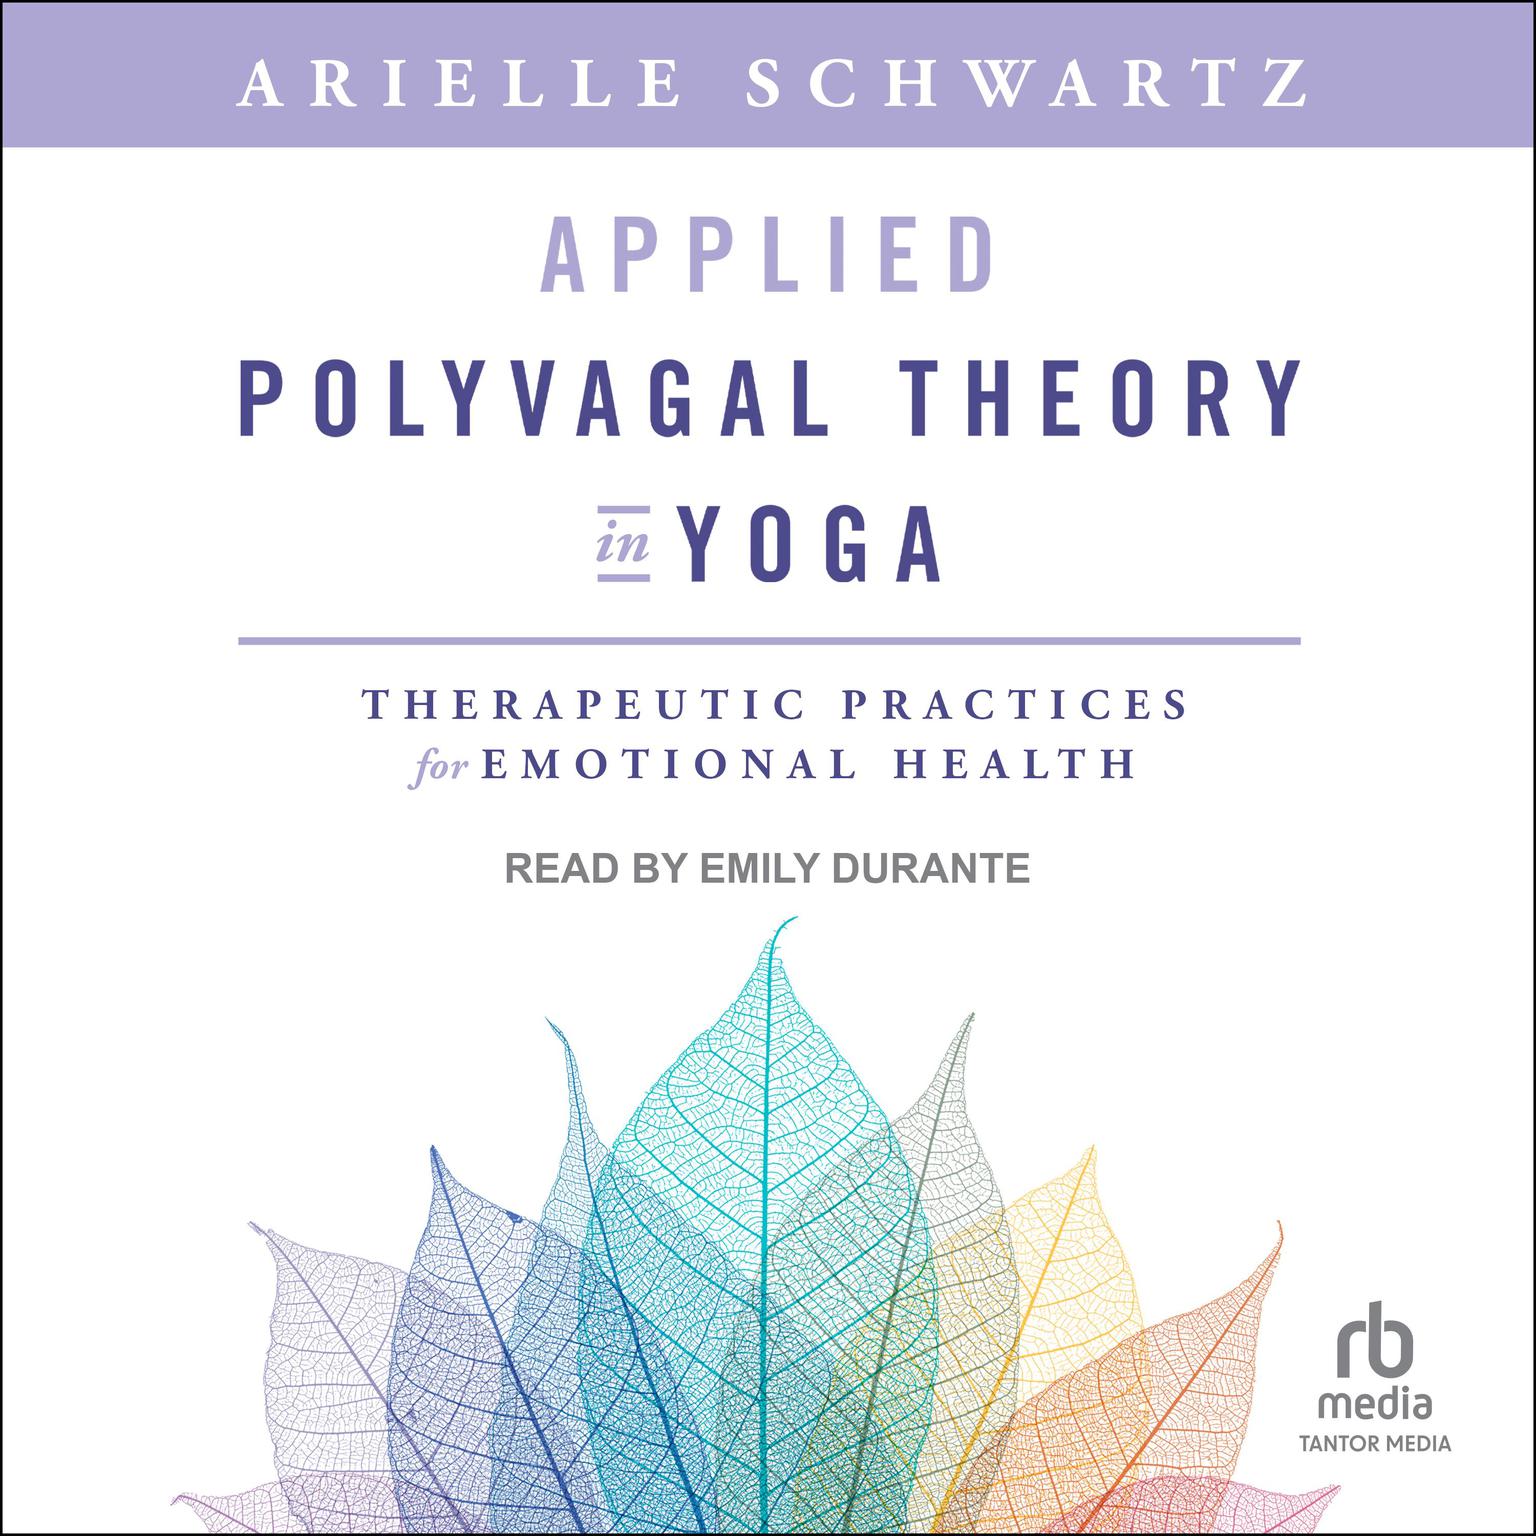 Applied Polyvagal Theory in Yoga: Therapeutic Practices for Emotional Health Audiobook, by Arielle Schwartz